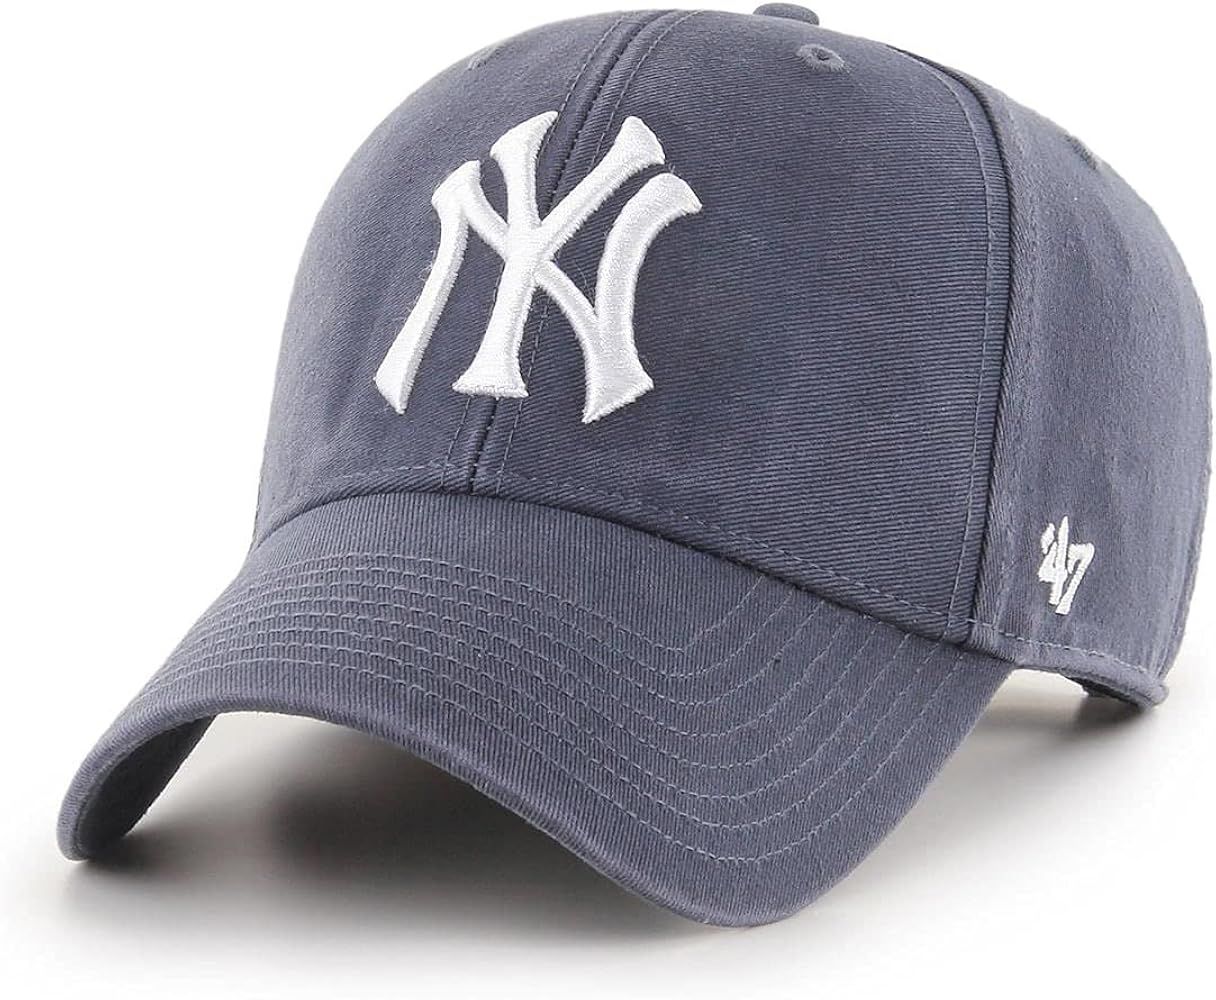 '47 Brand Relaxed Fit Cap - Legend New York Yankees Vintage | Amazon (US)